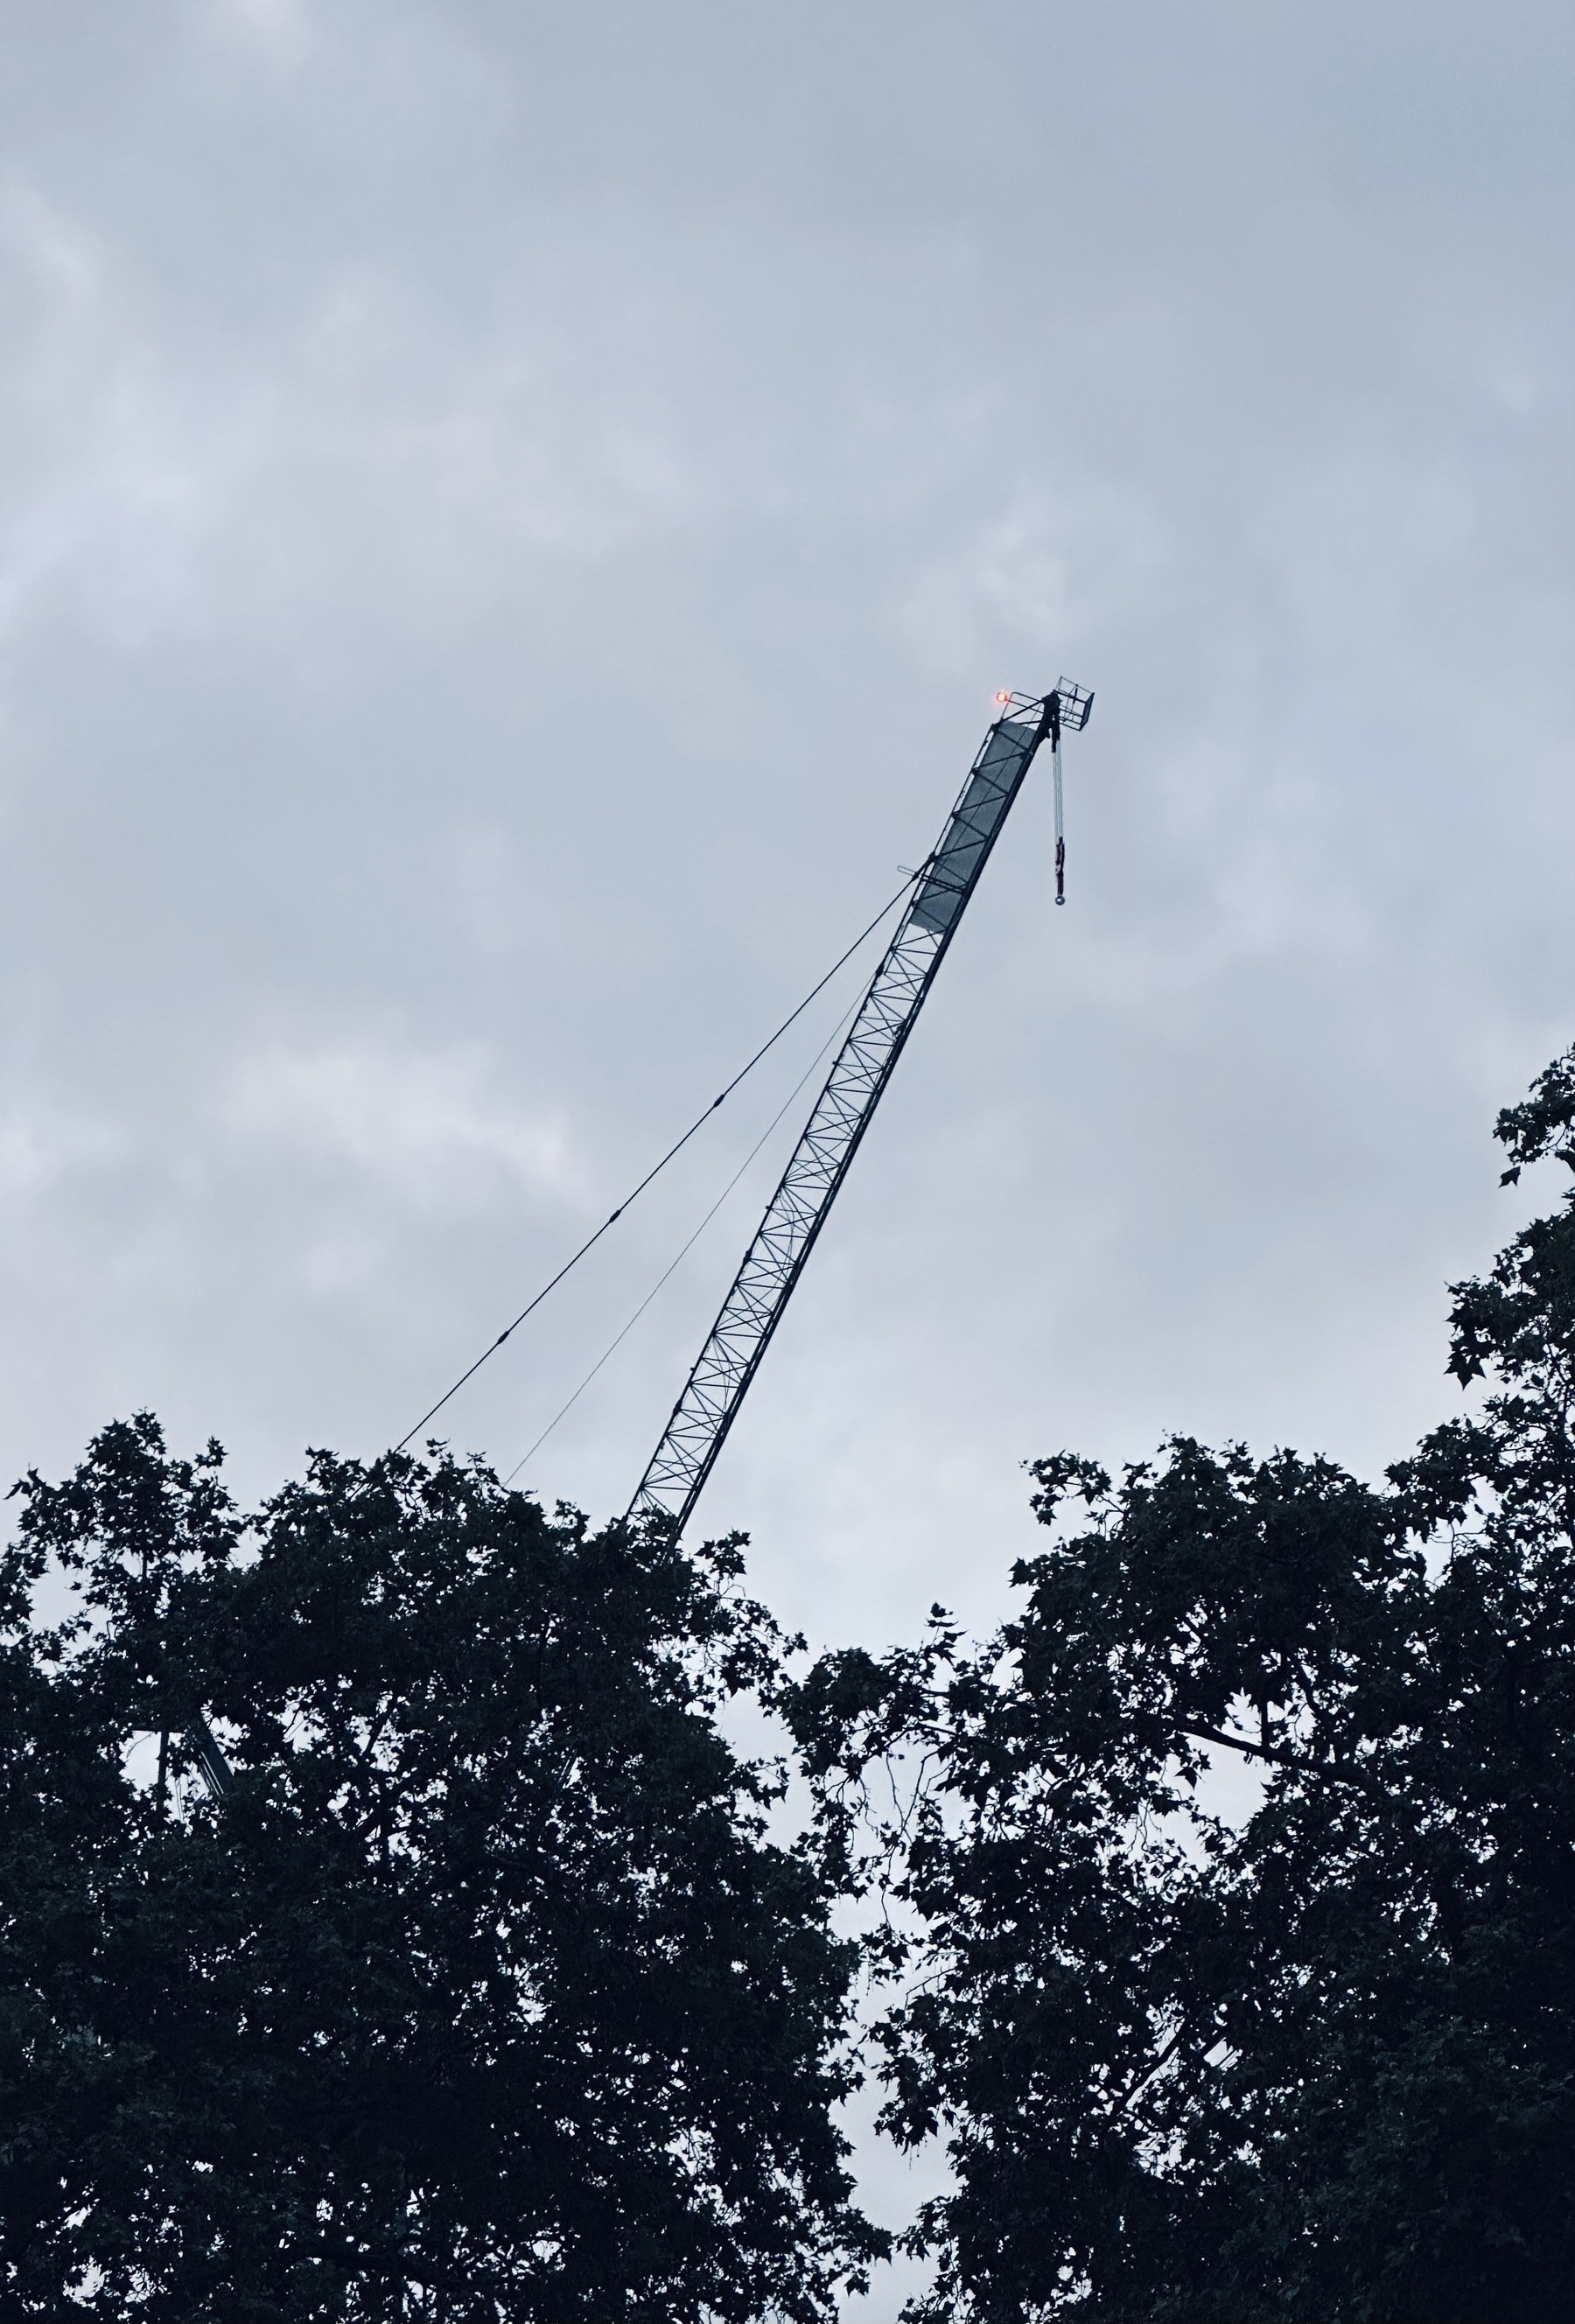 A crane against a cloudy grey sky, with silhouetted trees in the foreground.